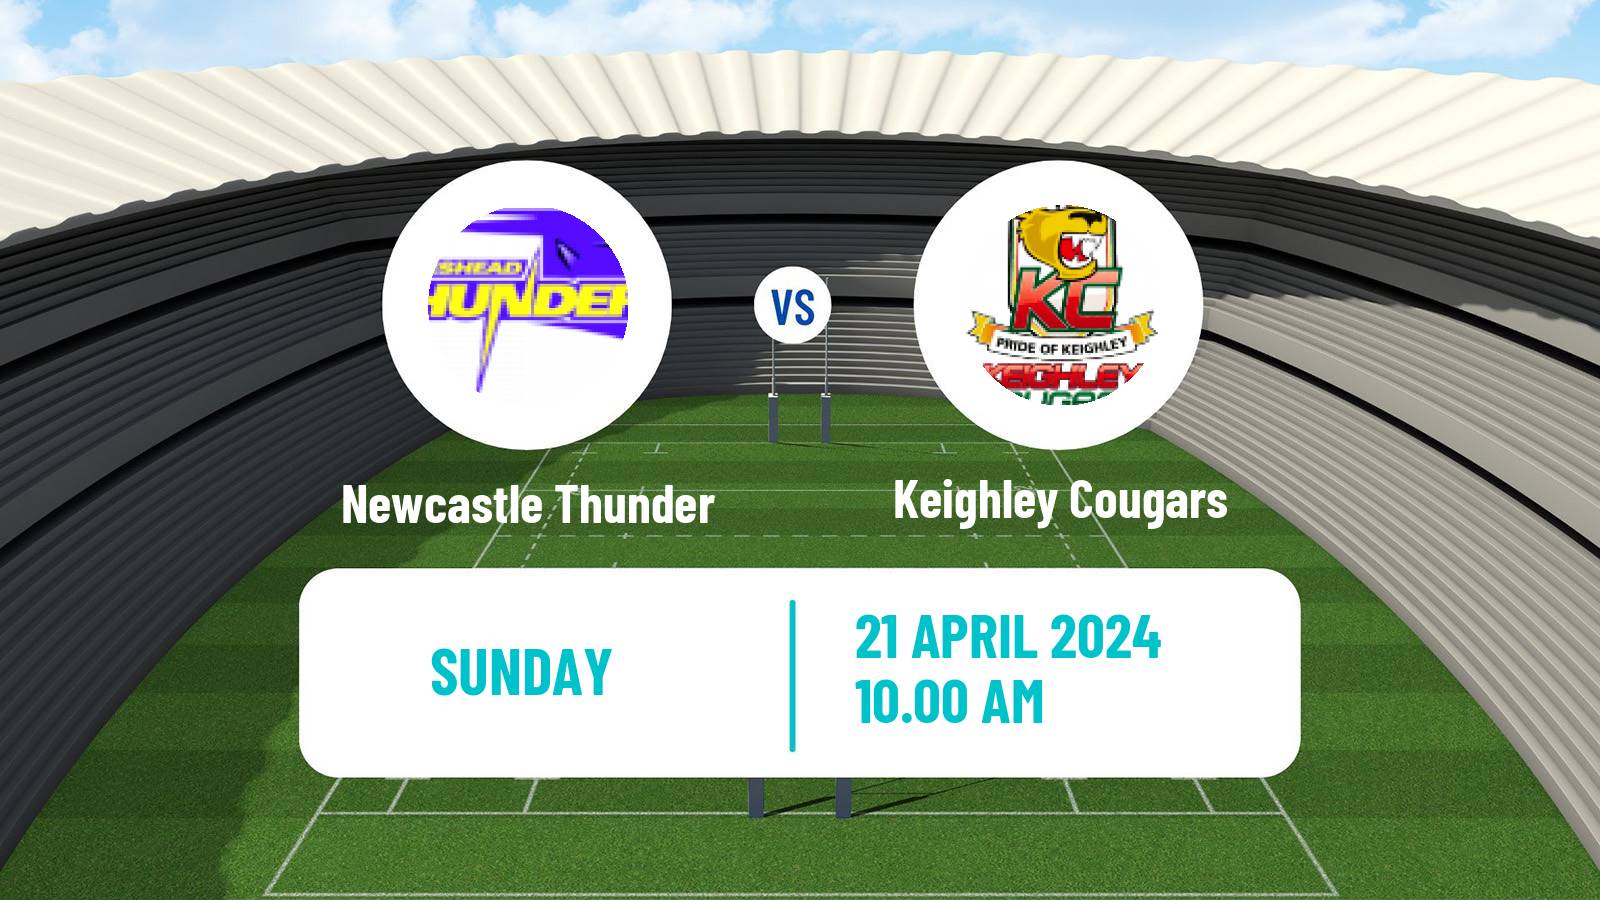 Rugby league English League 1 Rugby League Newcastle Thunder - Keighley Cougars